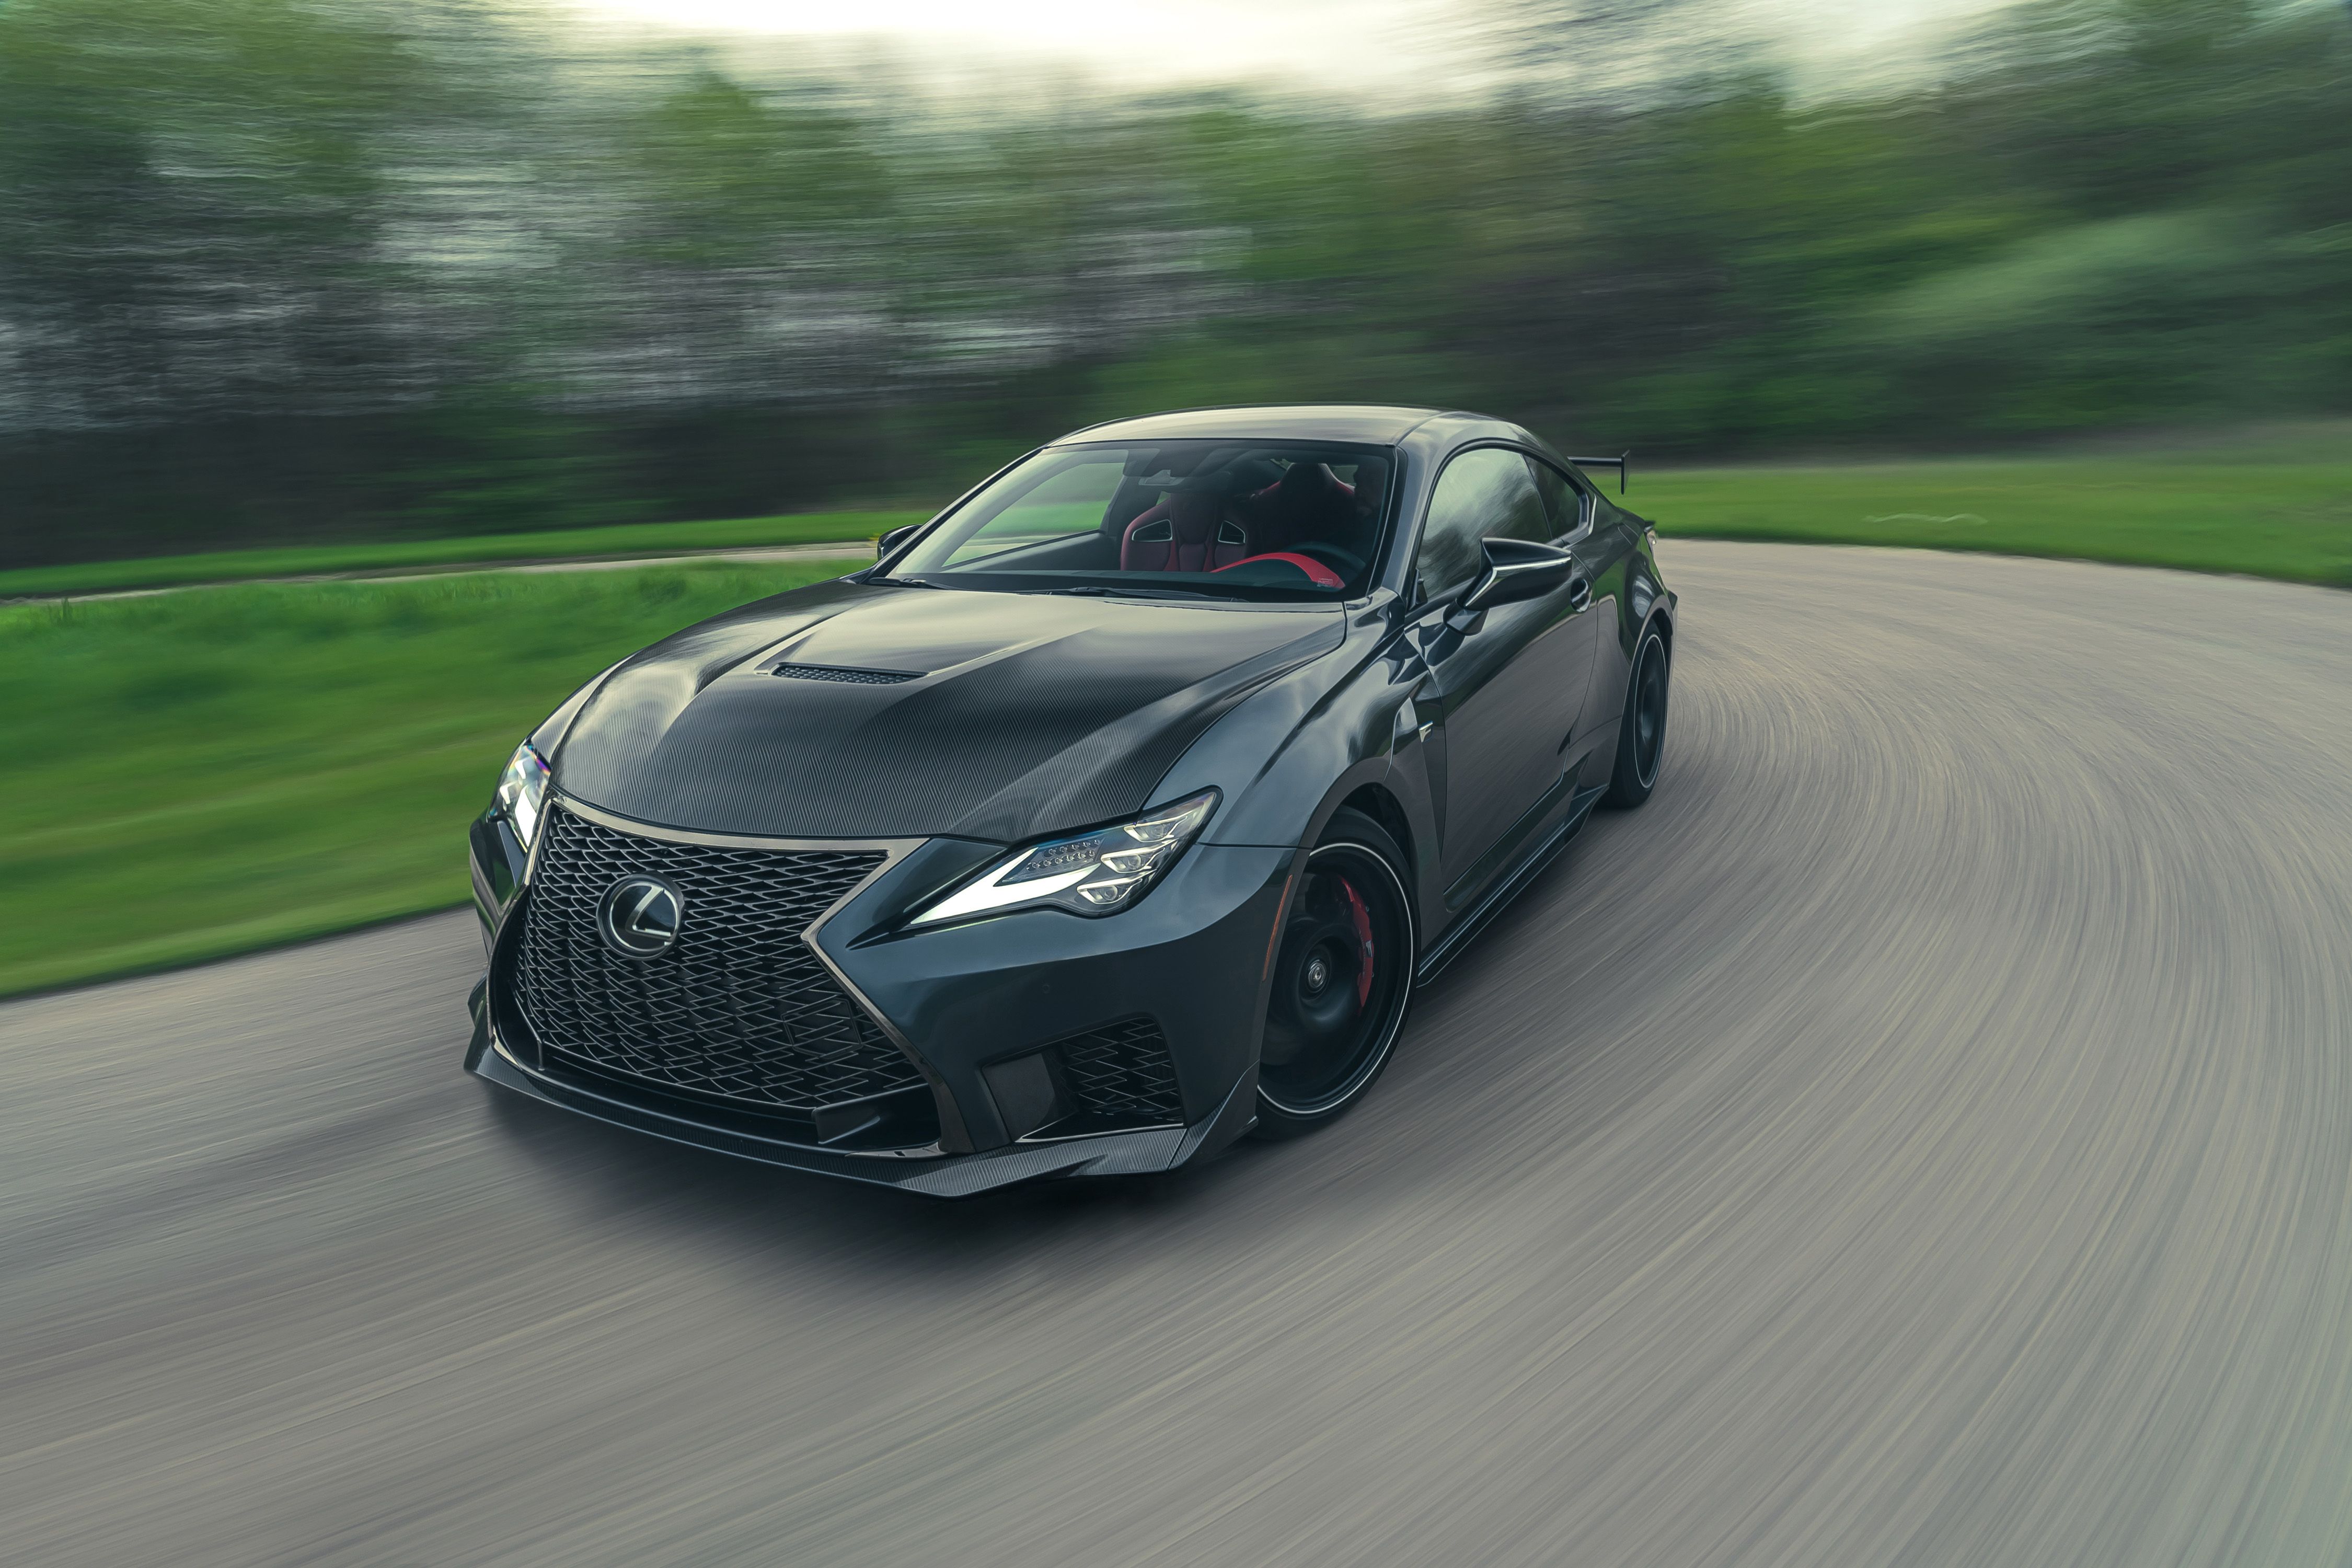 Tested: 2021 Lexus RC F Fuji Lacks the Punch to Match Its Price